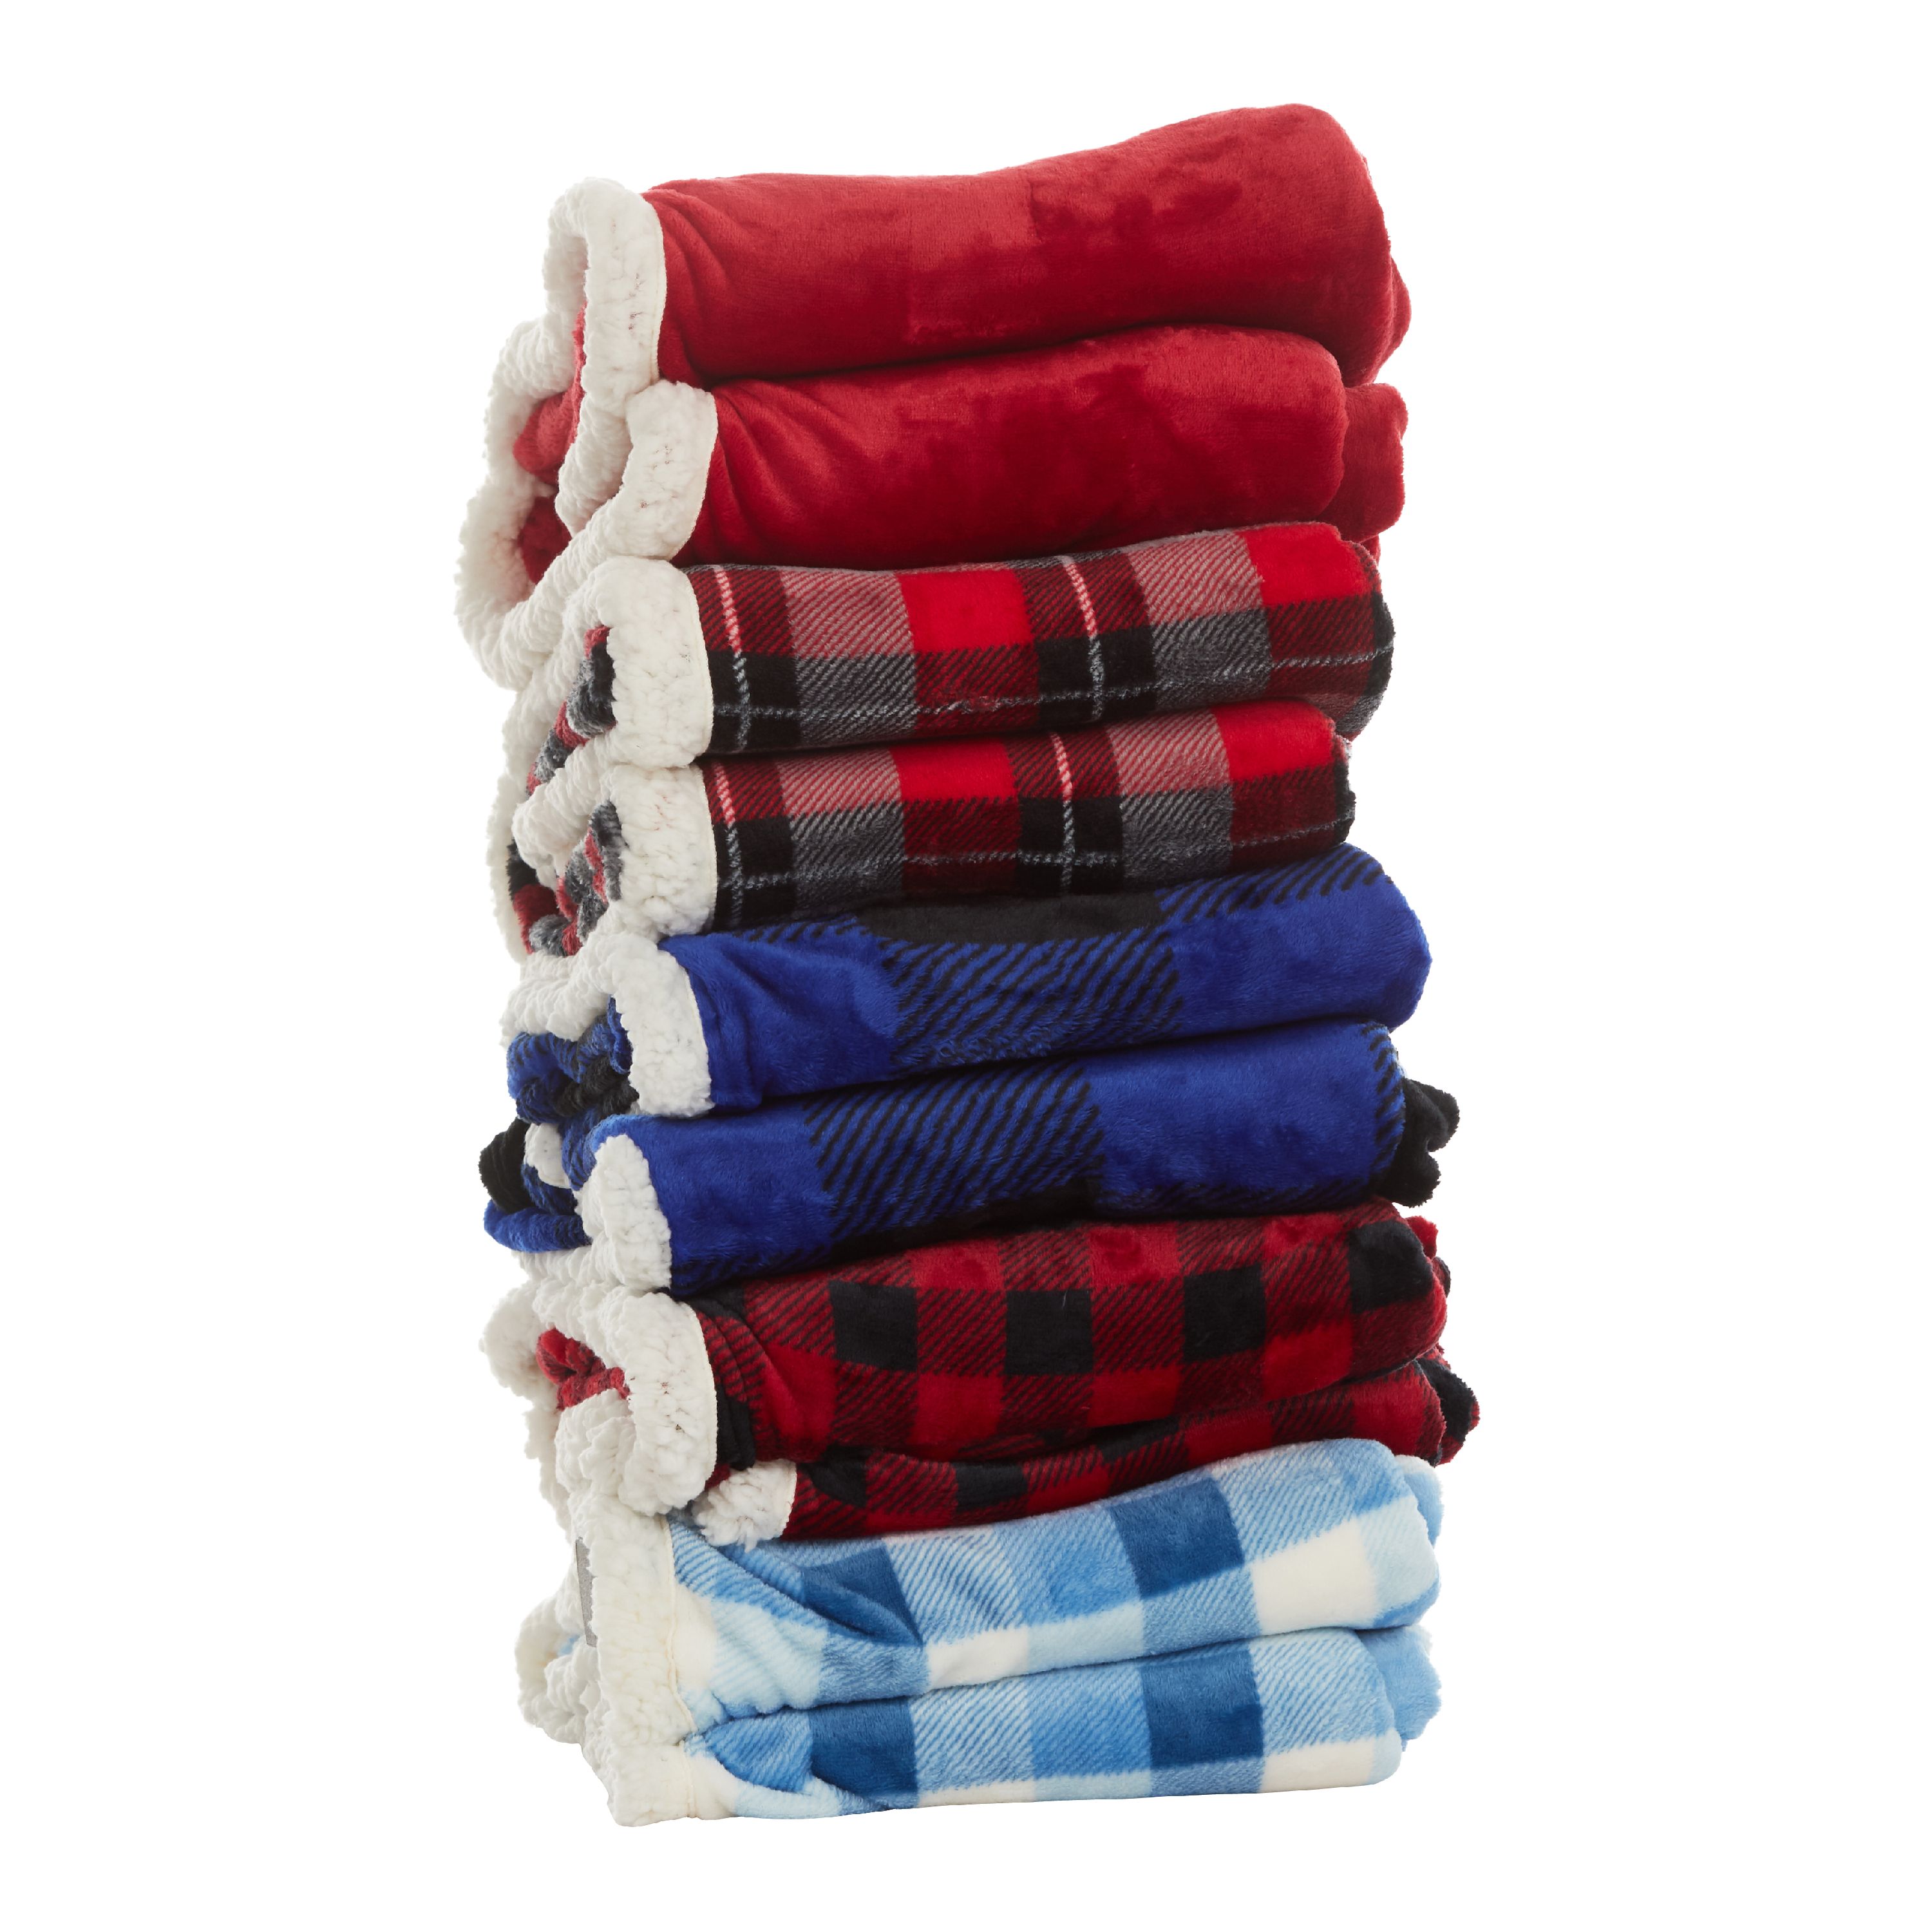 Cuddl Duds Oversized Throw Blanket with a Sherpa Foot Pocket, 50" x 70", Red - image 1 of 8